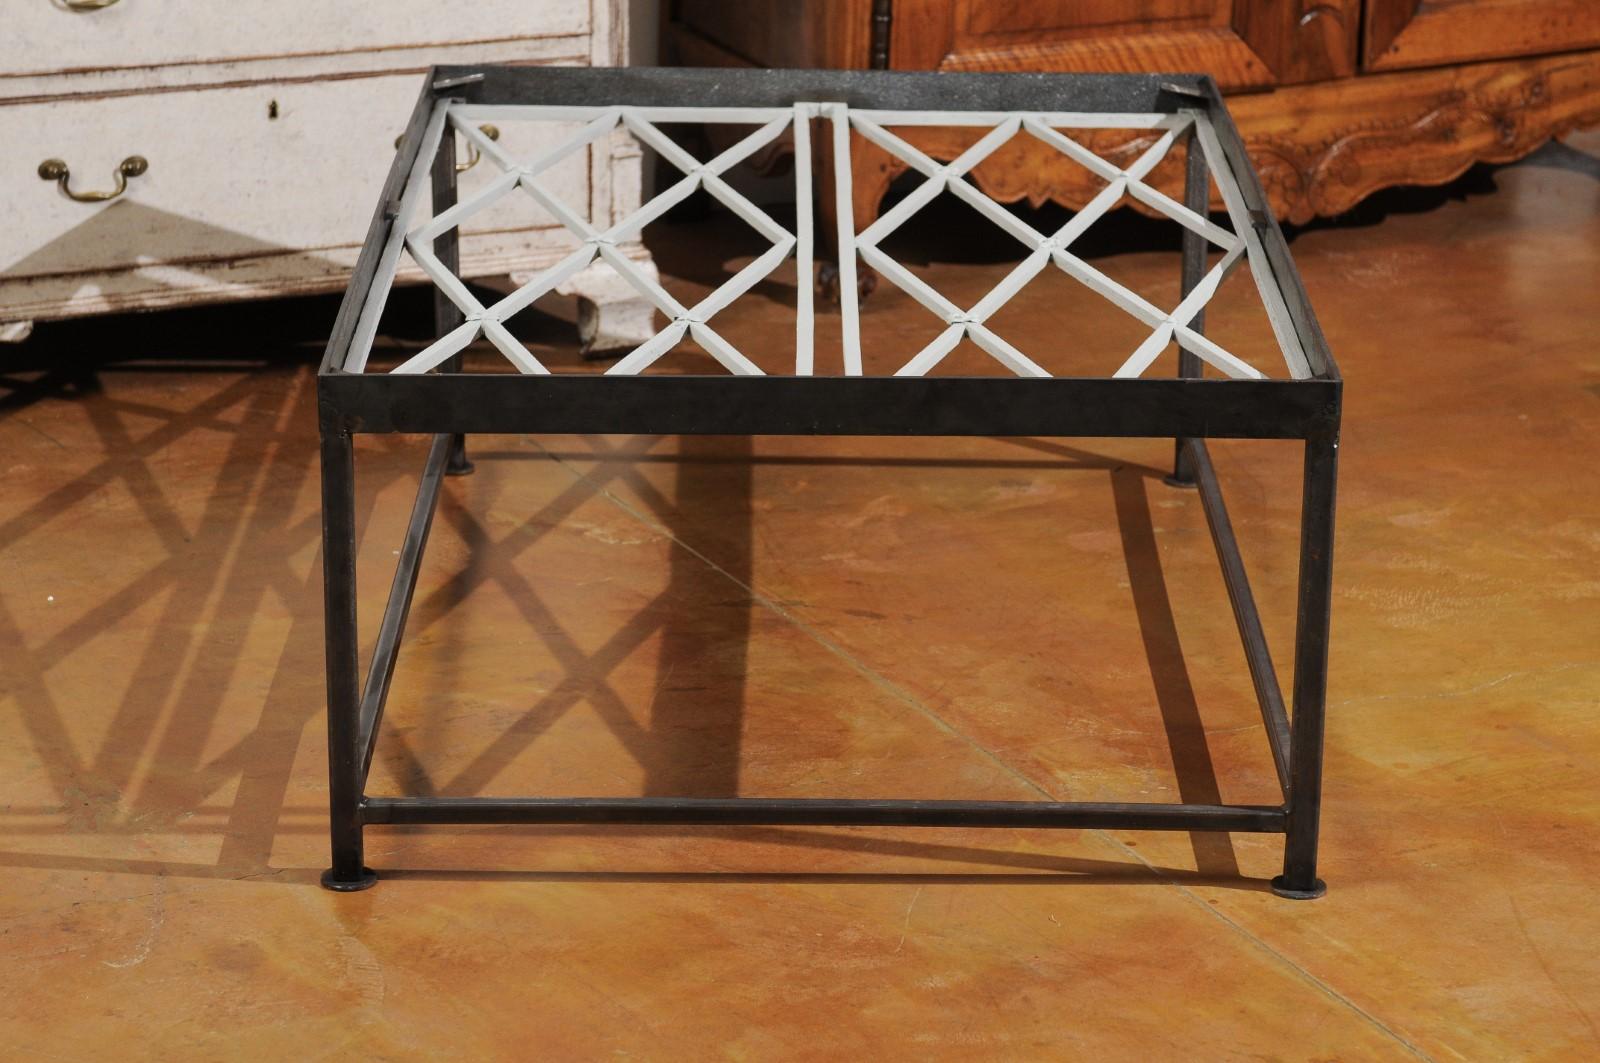 French Contemporary Coffee Table Made from 18th Century Cast Iron Railings 4